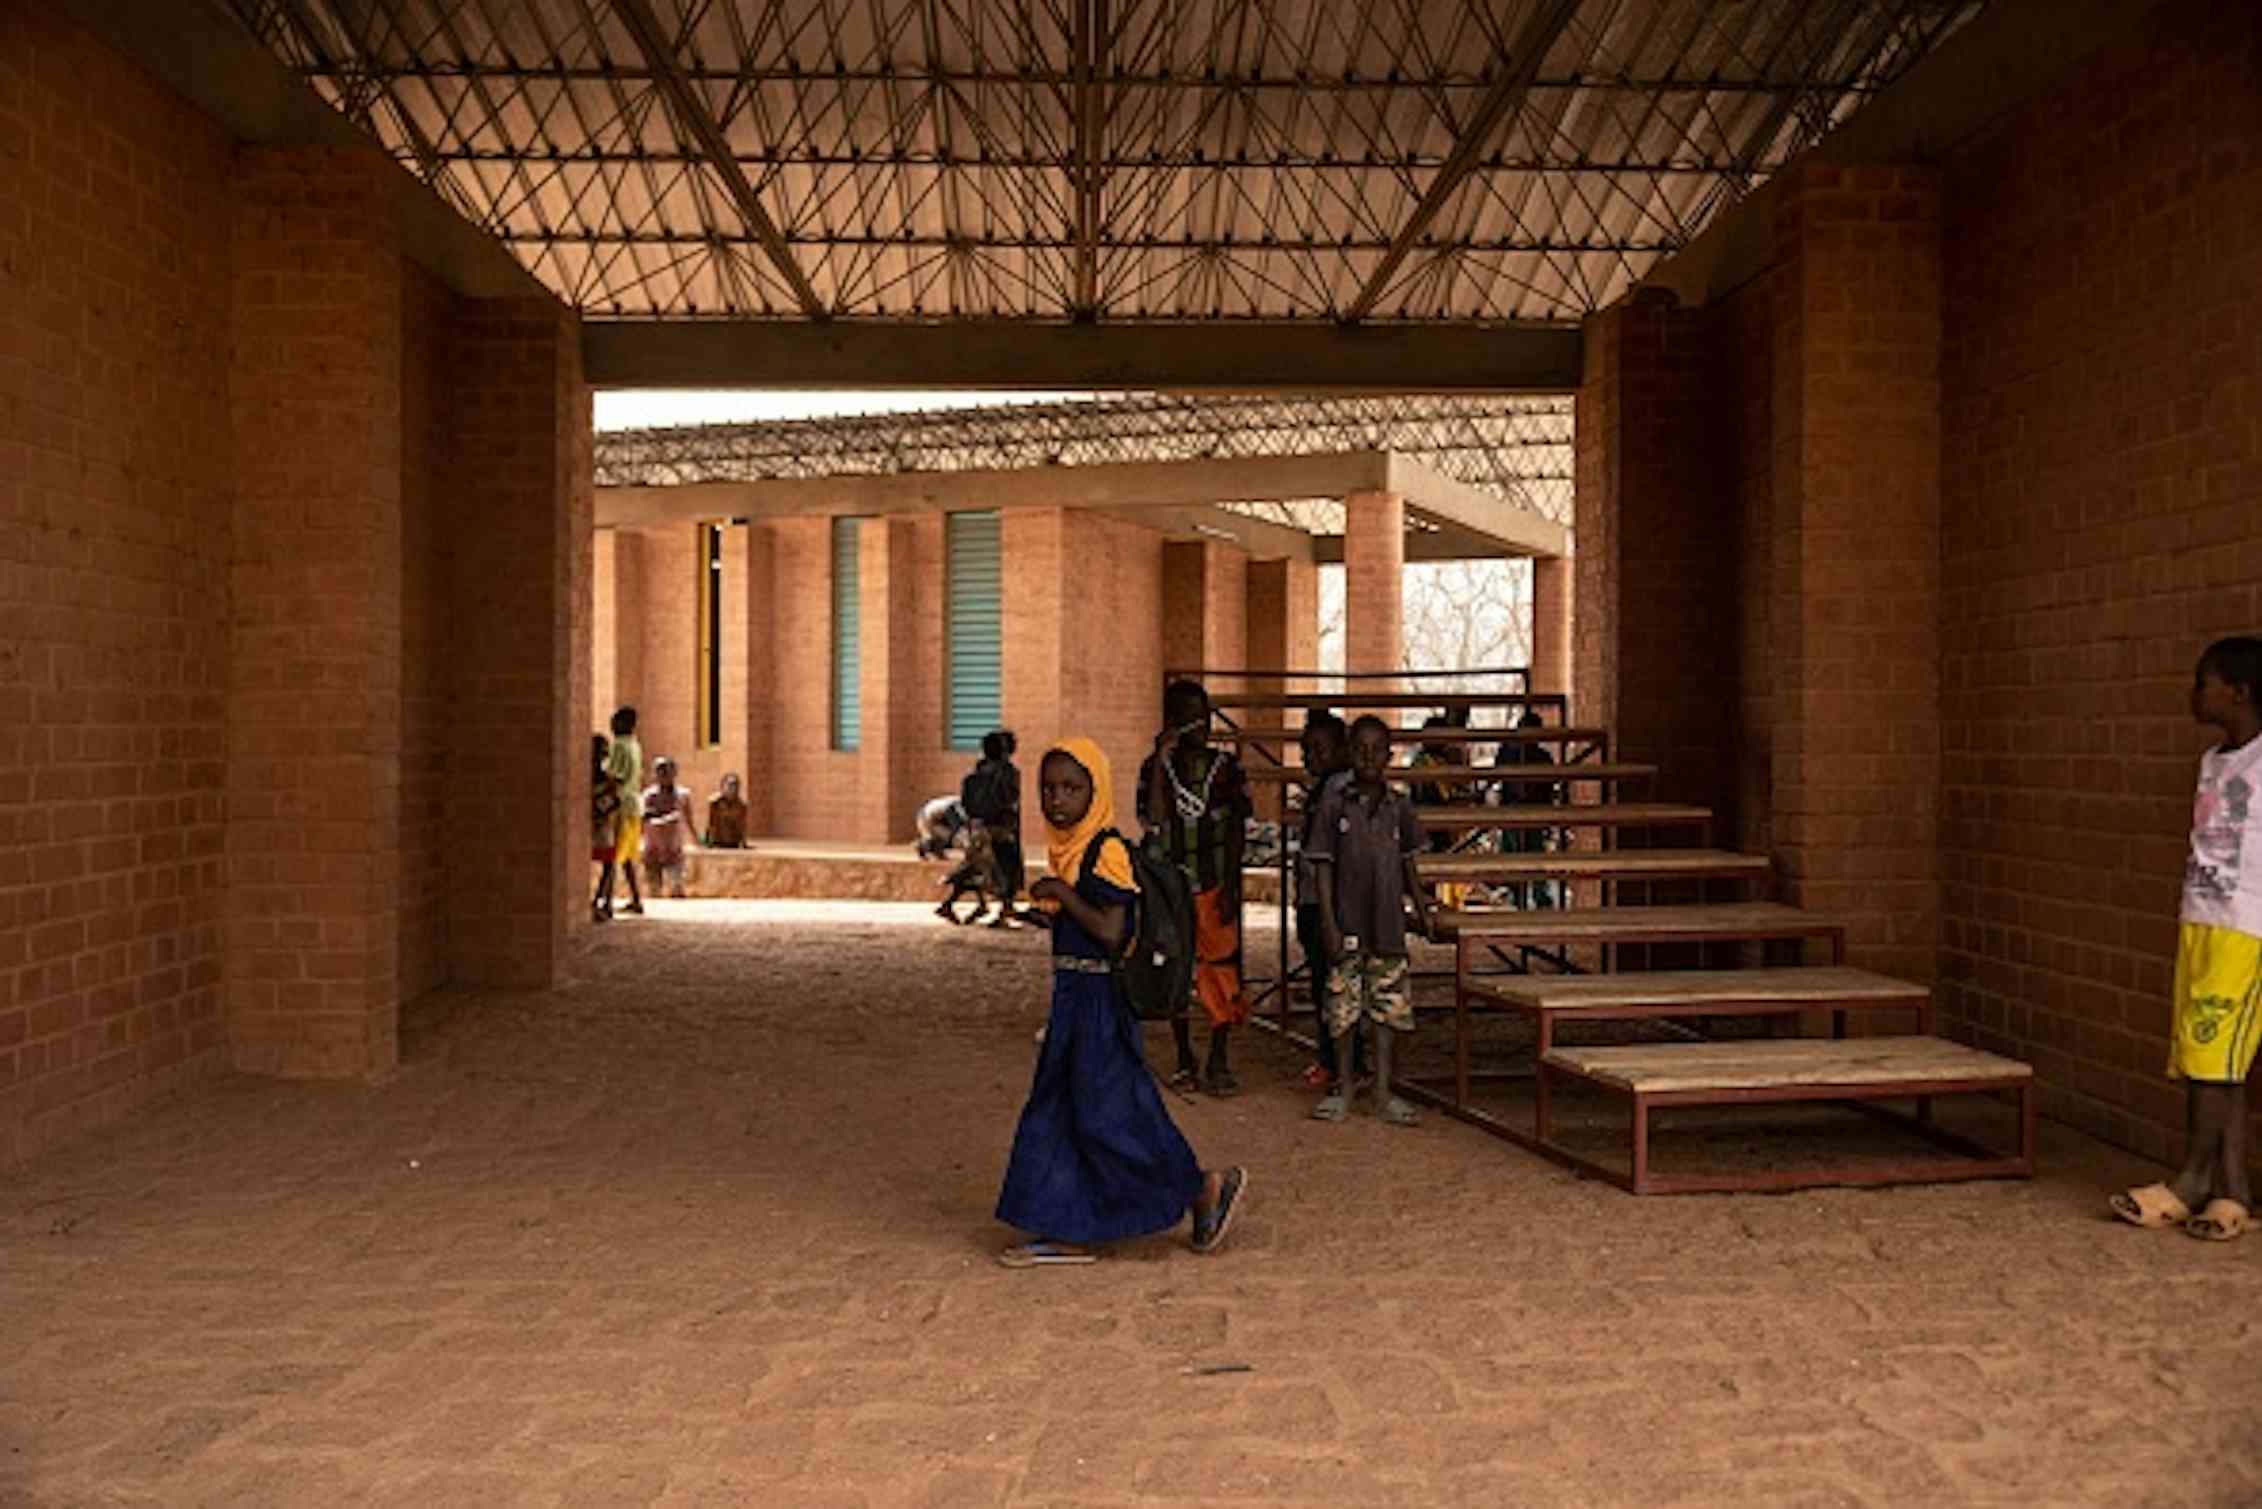 The inspiring architect from Burkina Faso who lifted world’s biggest prize